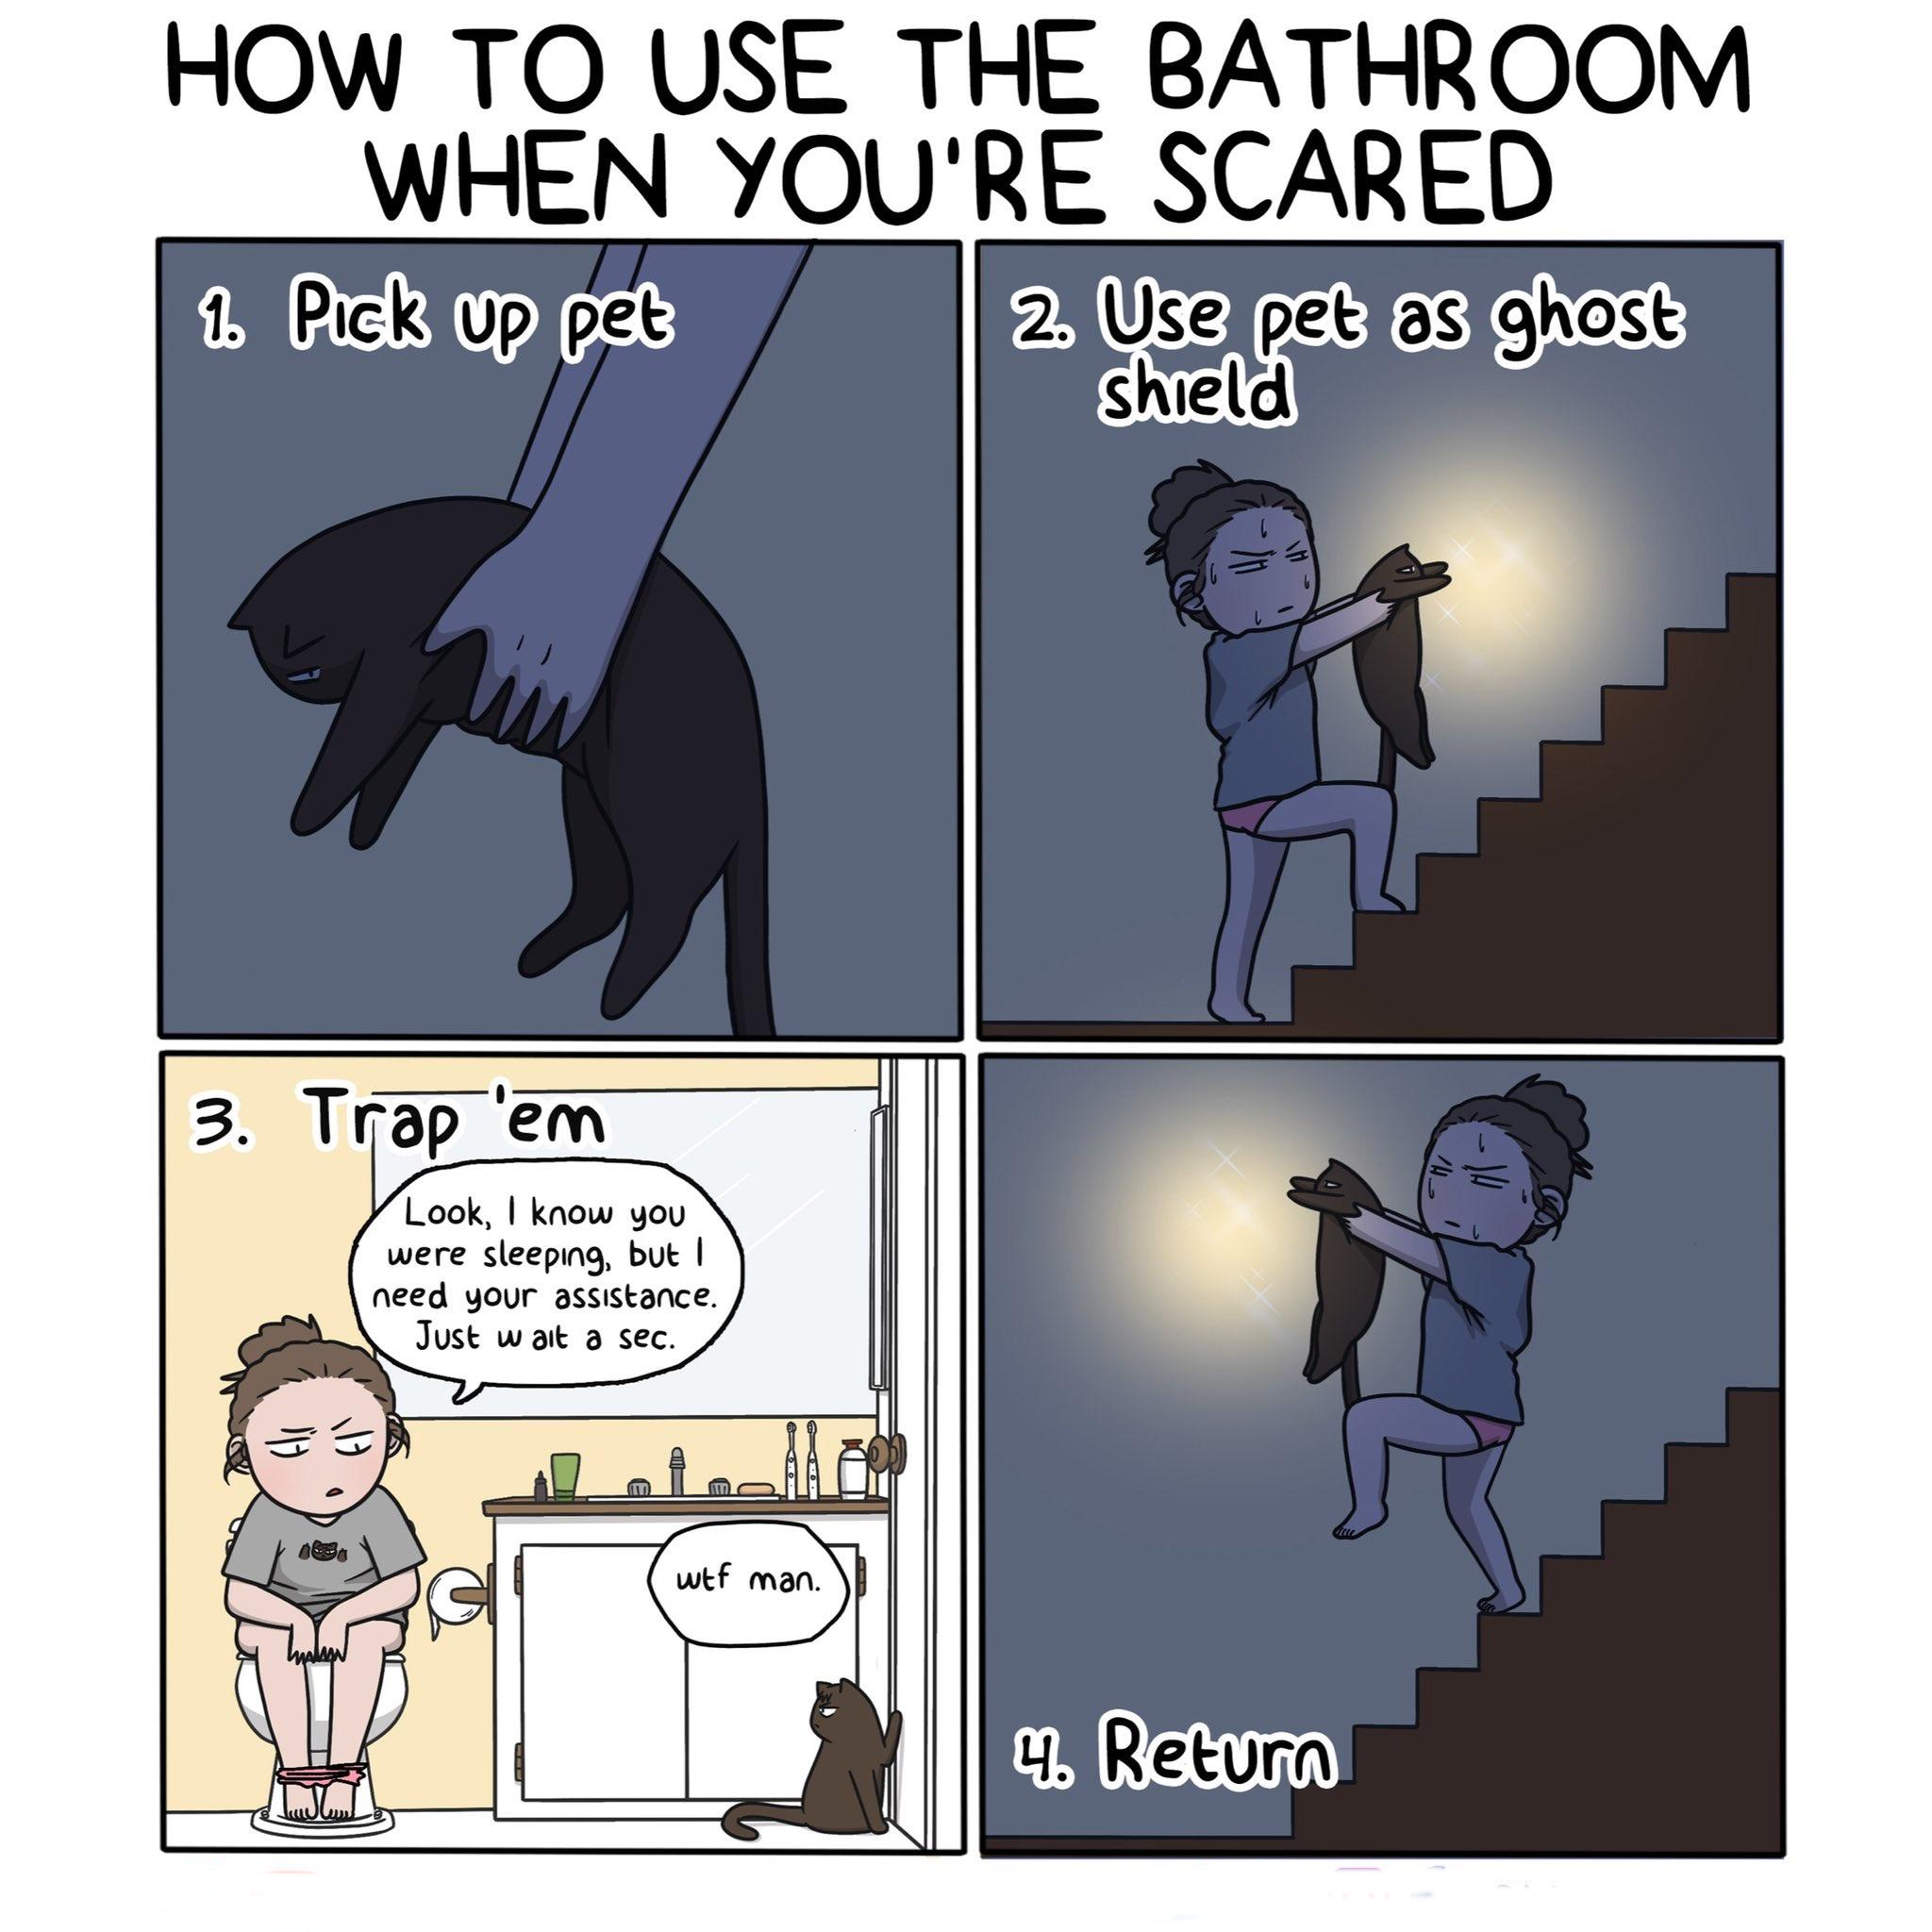 How one can bathroom when scared.